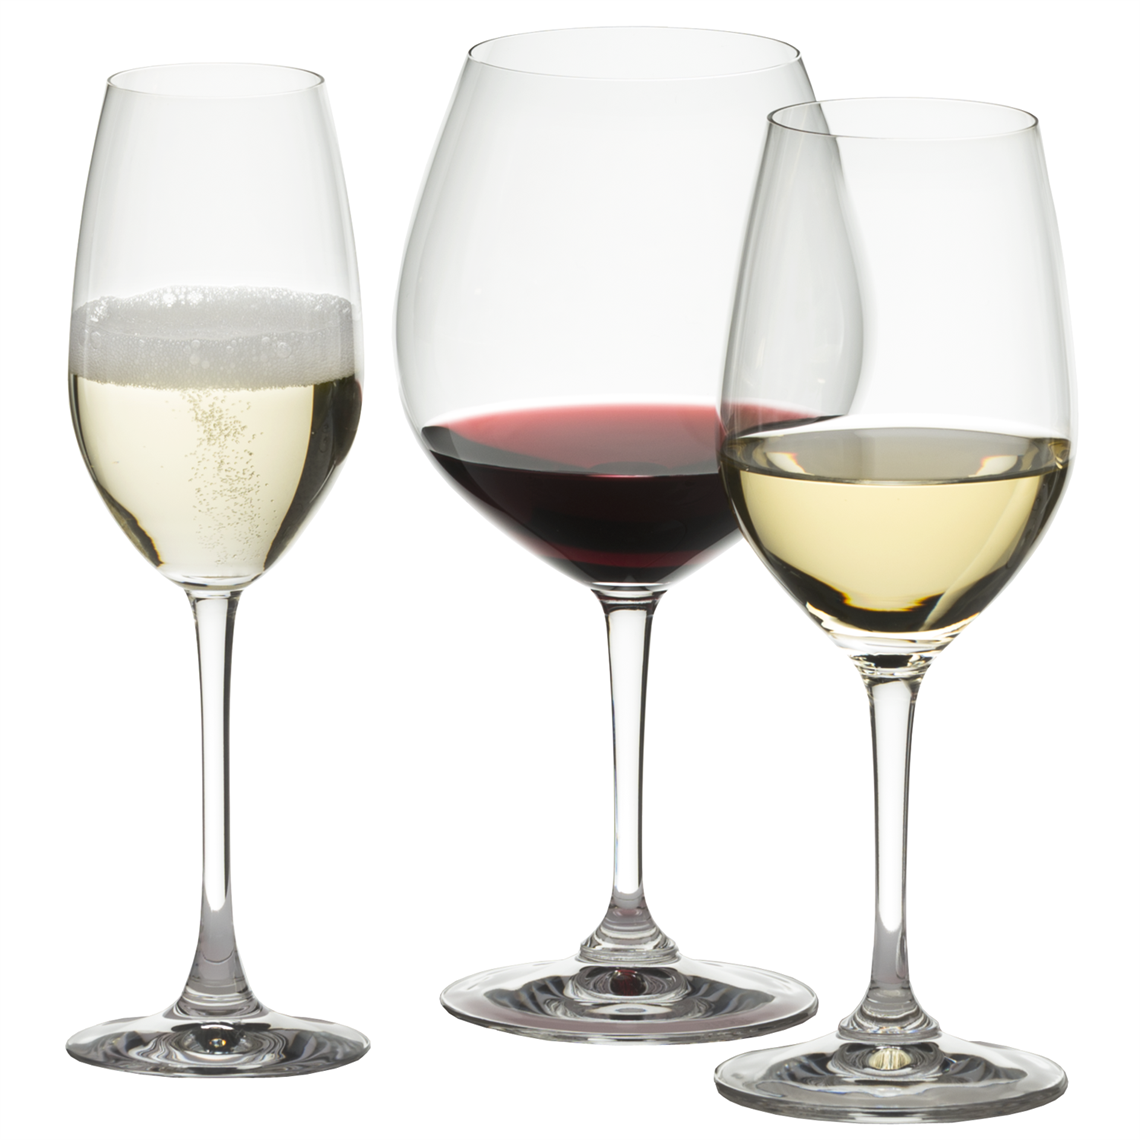 View more mondial from our Restaurant & Trade Glasses range